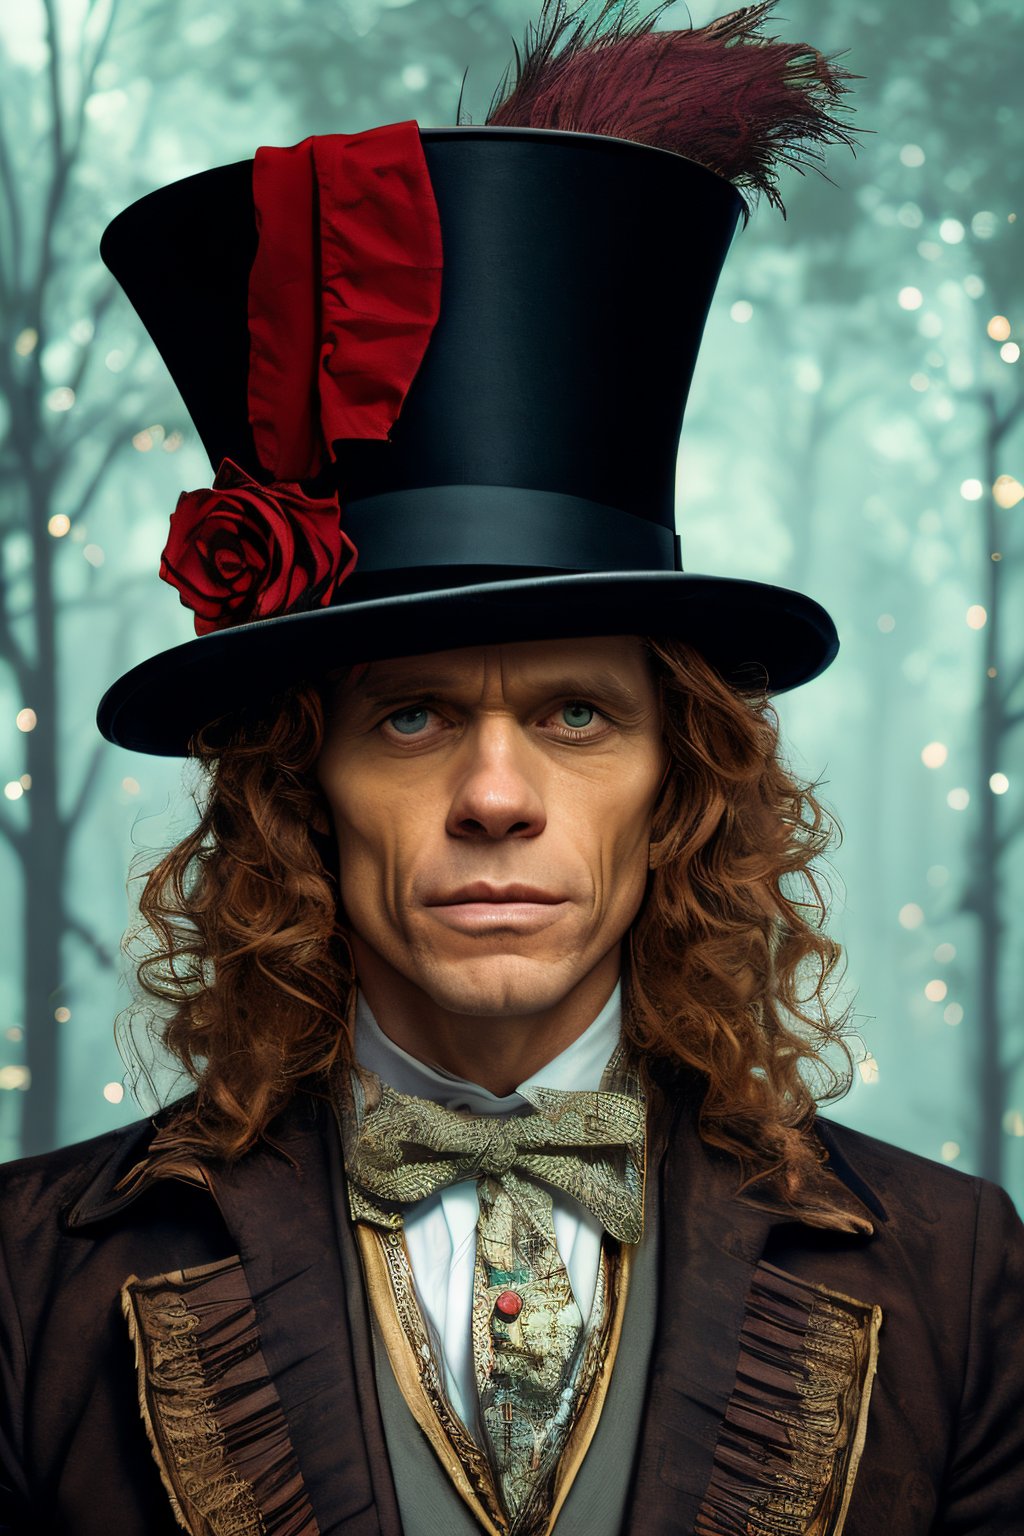 A close up of a man wearing a top hat,  john picacio and brom,  willem dafoe as scarecrow,  best of behance,  madhatter,  josan gonzalez and tyler edlin,  by Jack Davis, ,  character design,  embers,  bright bold colors,  macro lens,  dark fantasy,  decopunk,  cinematic,  dslr,  bokeh,  american horror story,  redneck